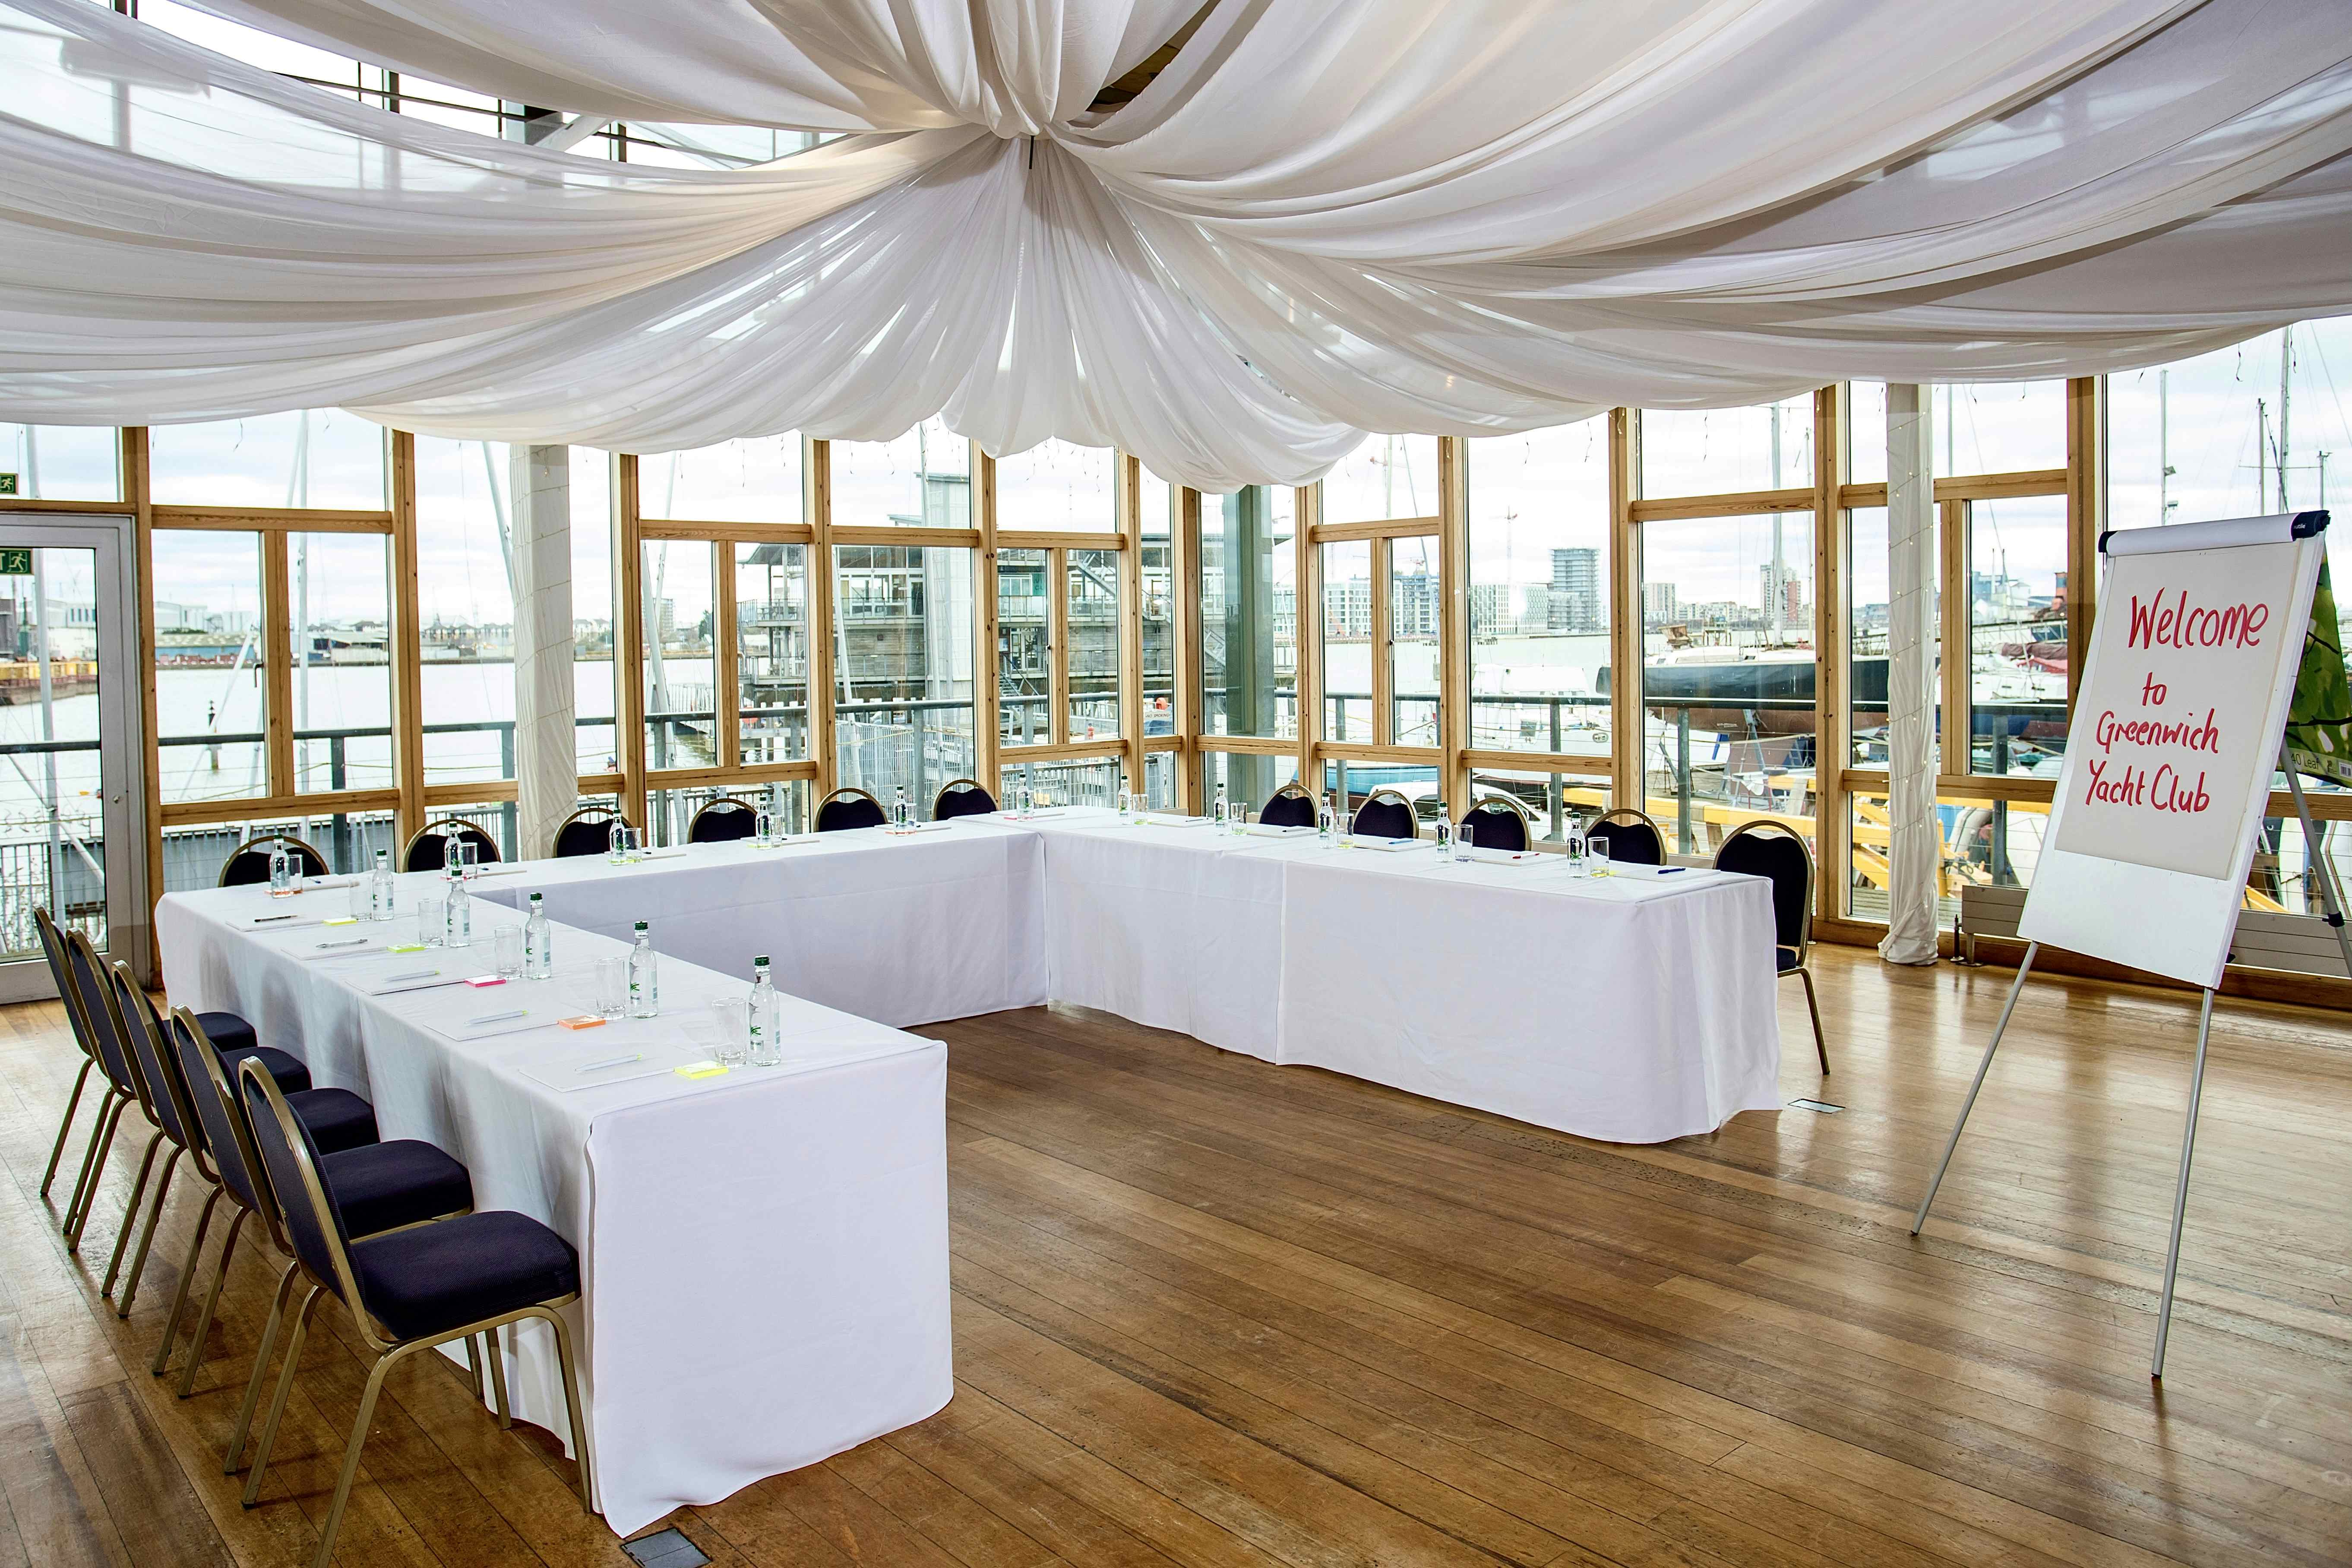 River Rooms, Greenwich Yacht Club 